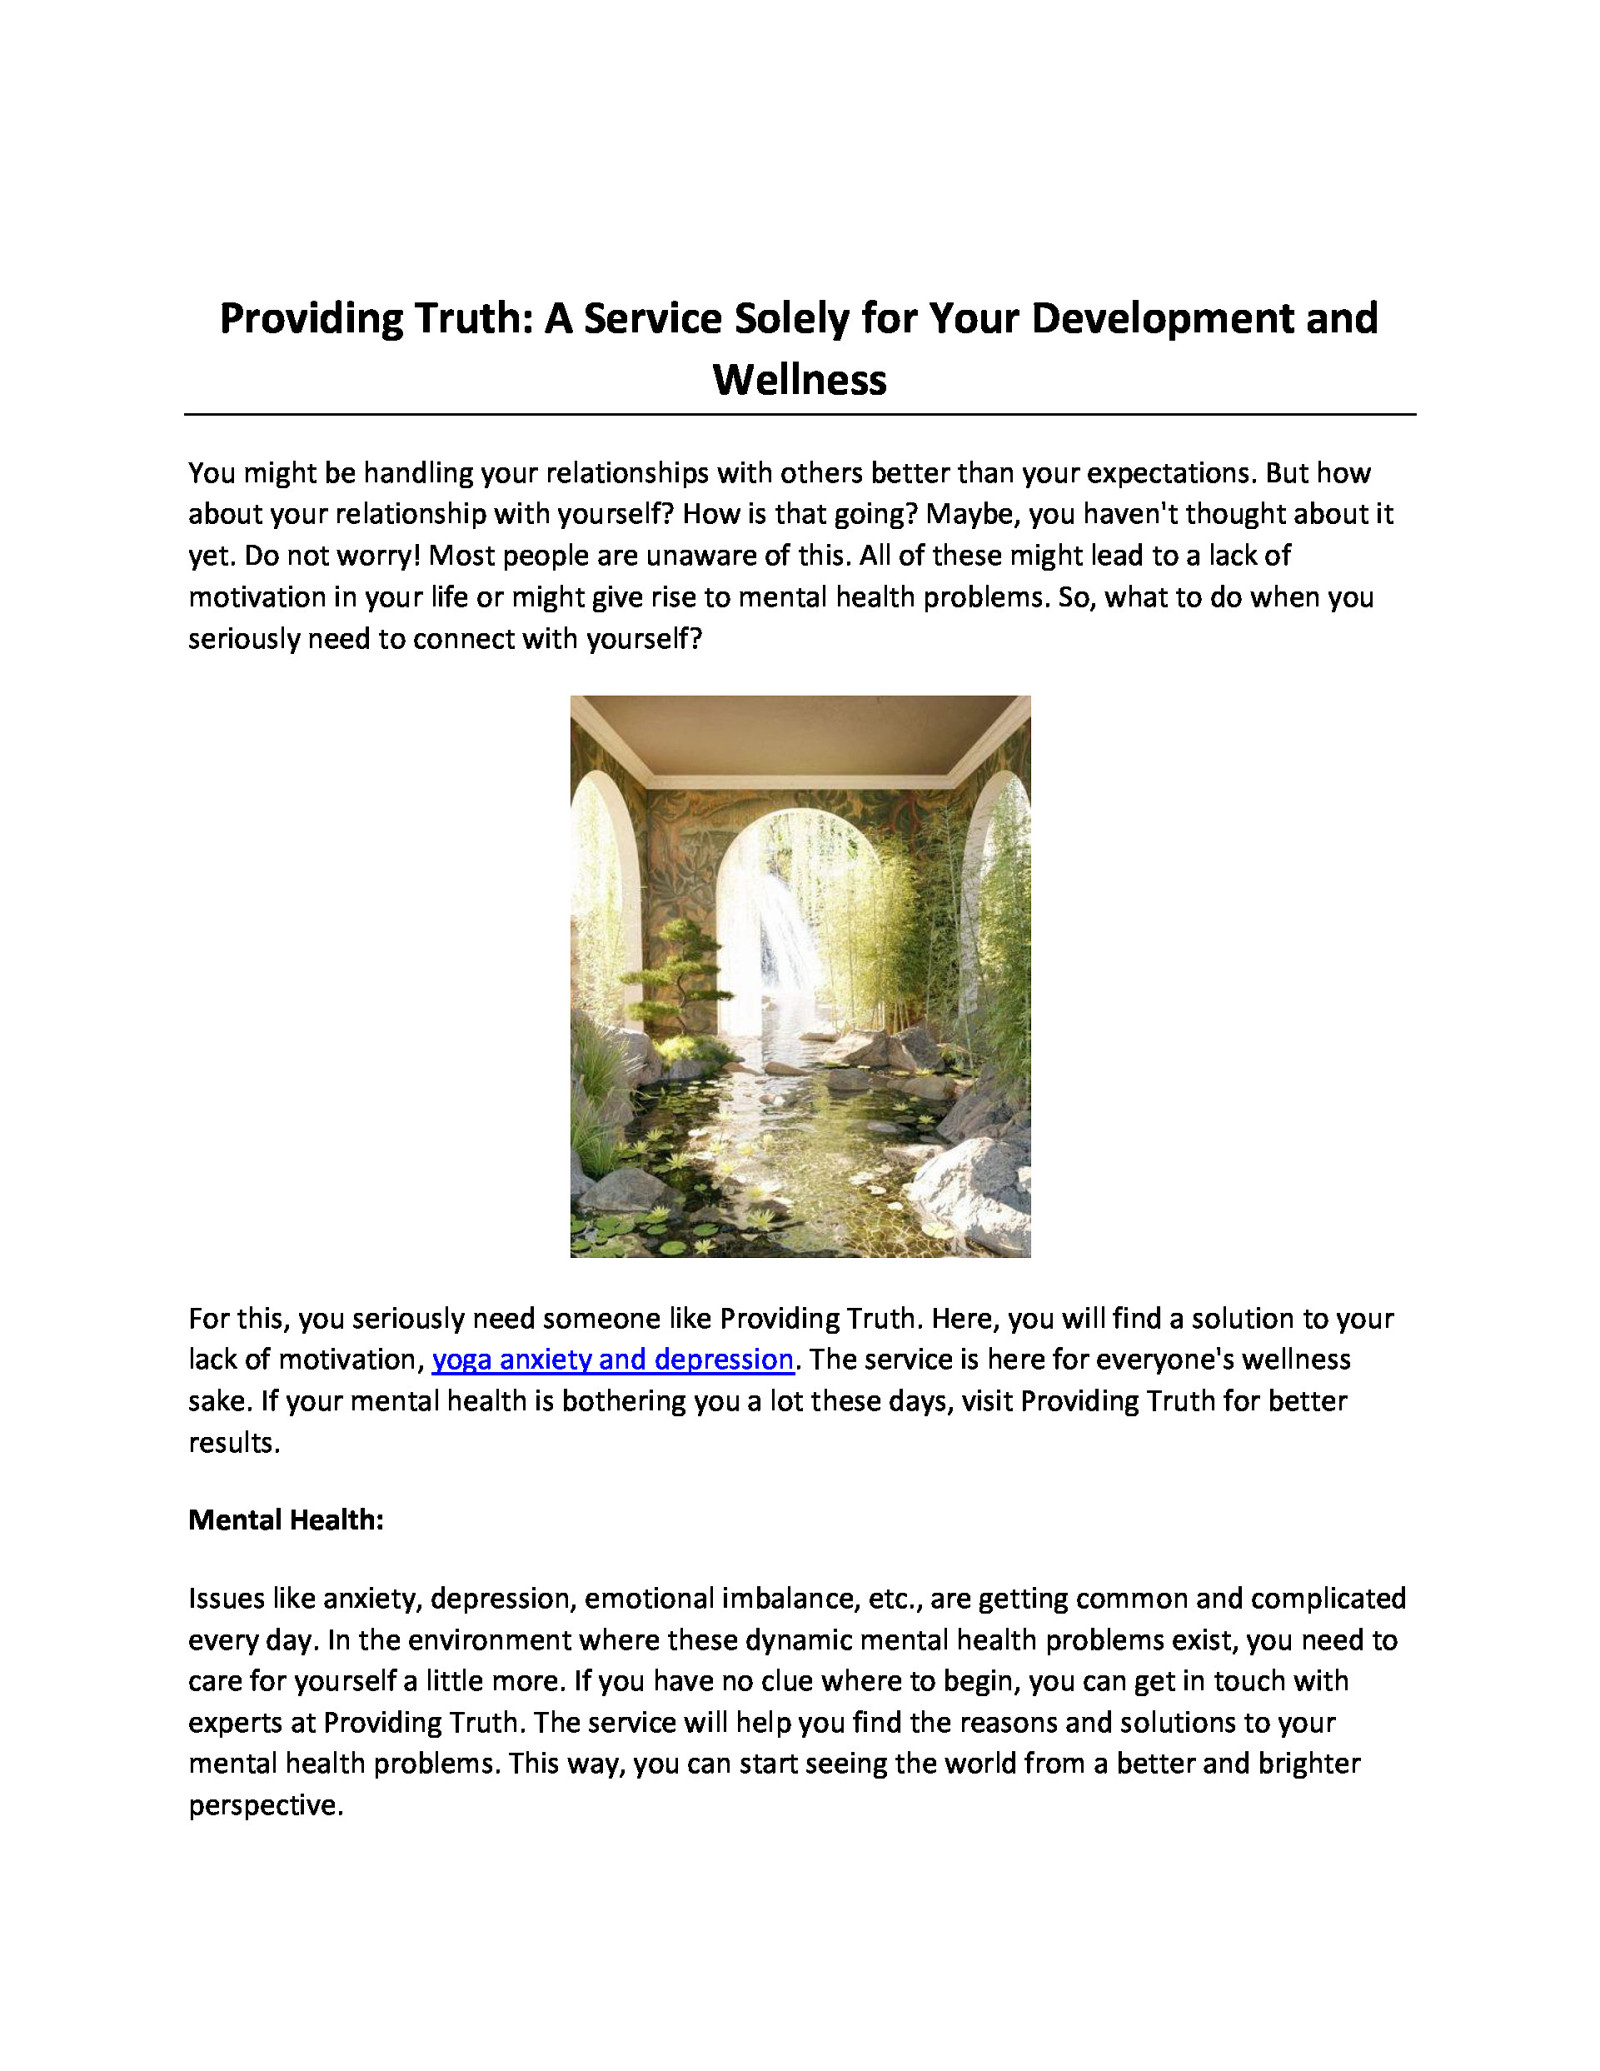 Providing Truth: A Service Solely for Your Development and Wellness